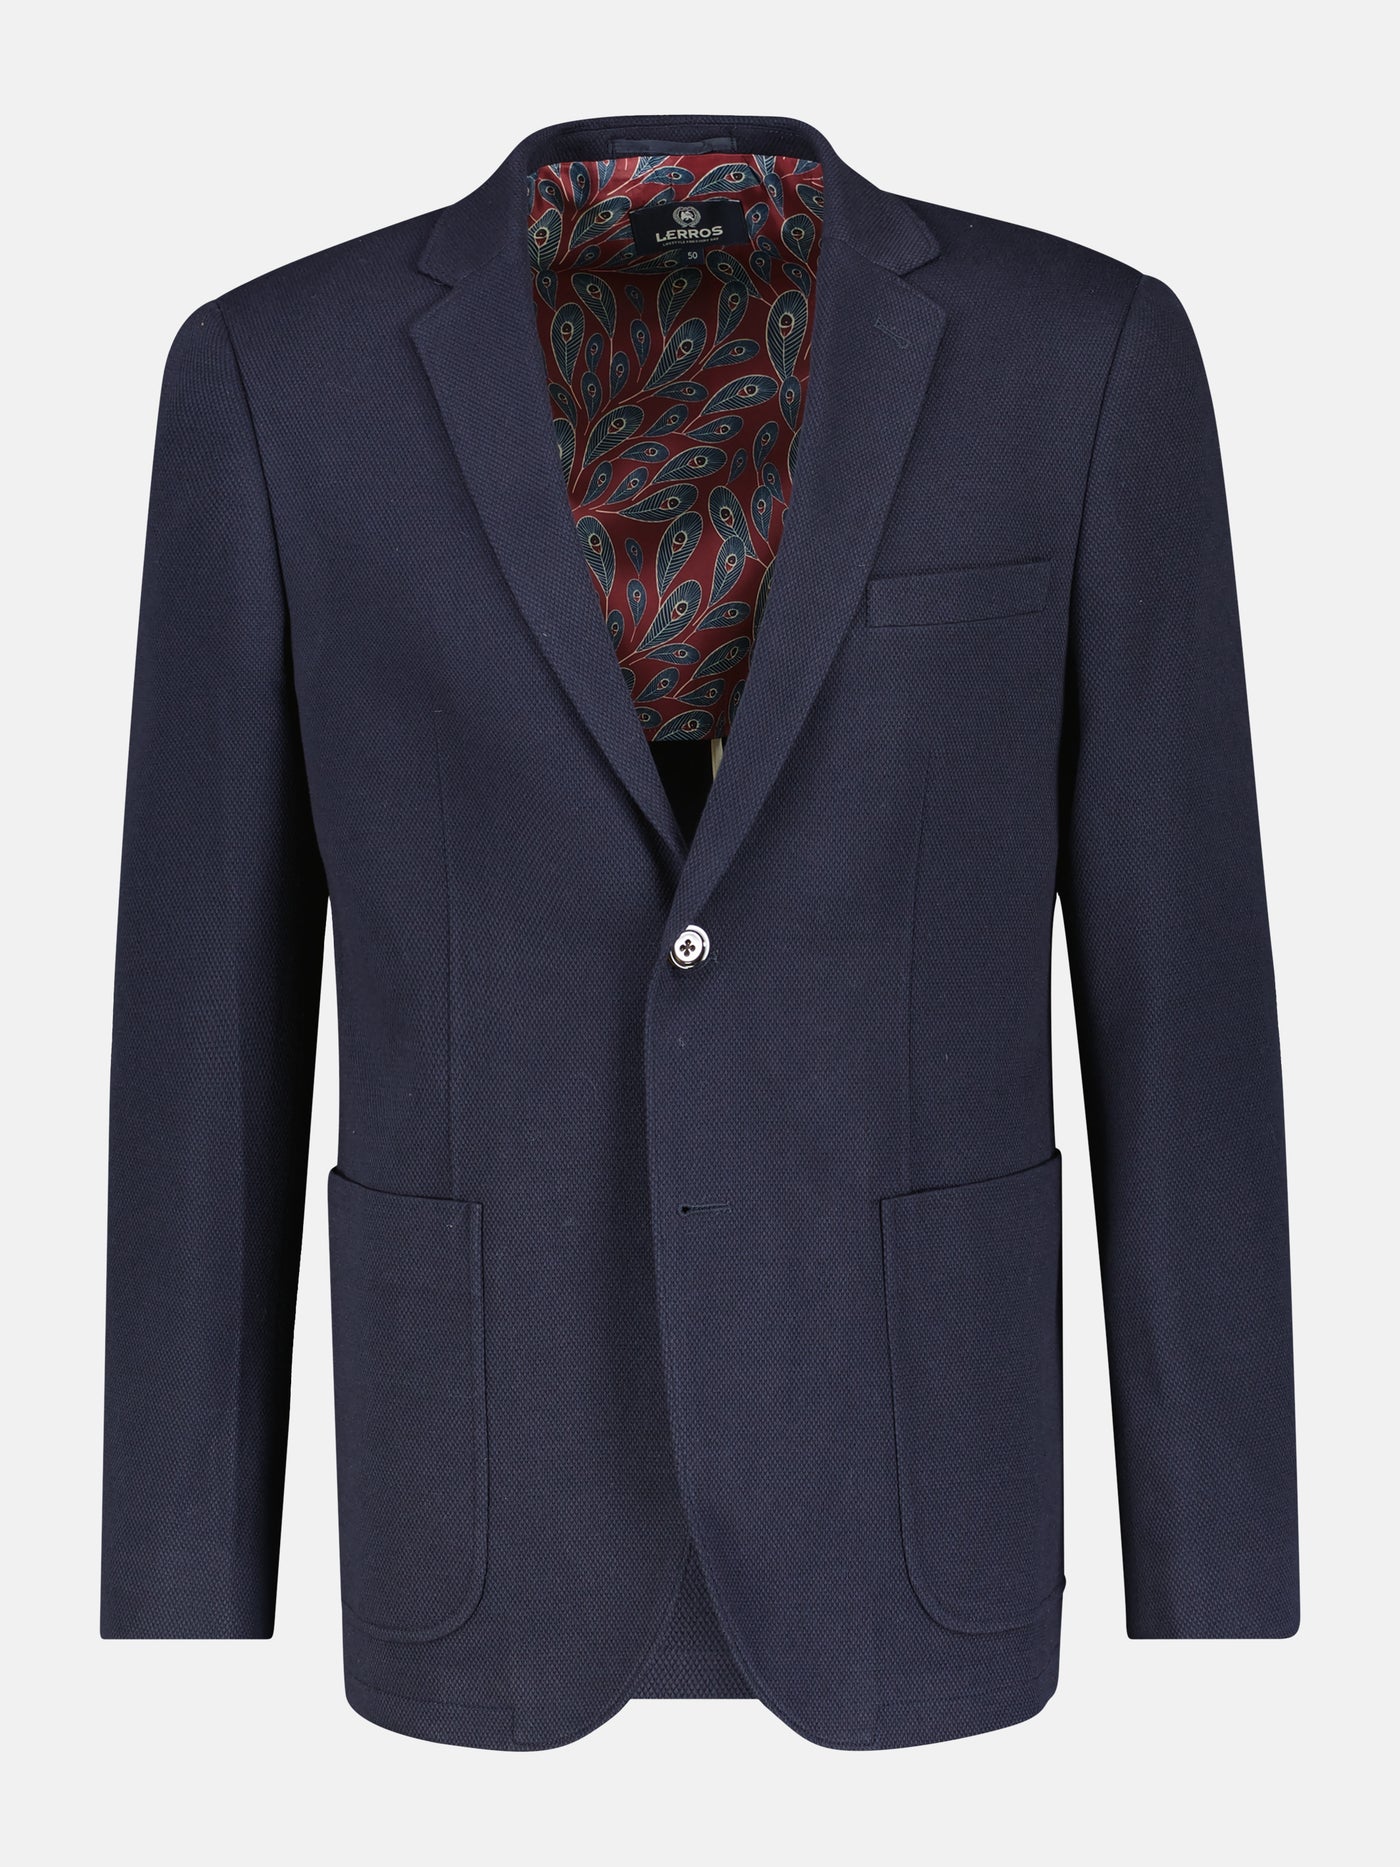 Jacket with a structured pattern. plain colors